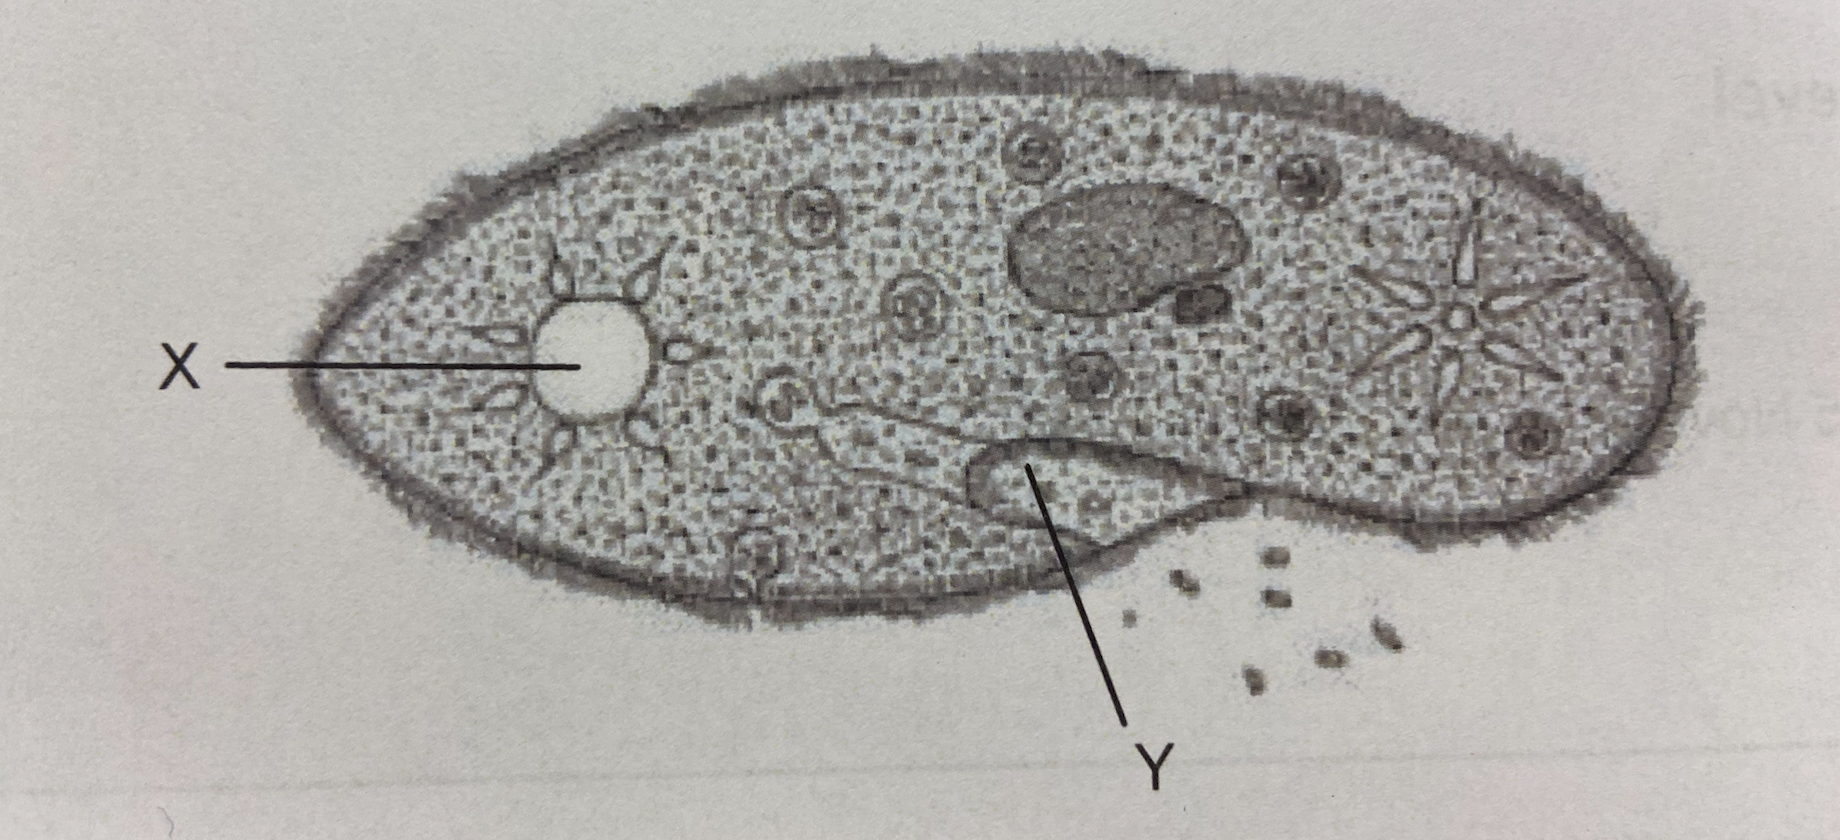 <p>Which function is accomplished by structures X and Y in the <em>Paramecium</em>?</p>